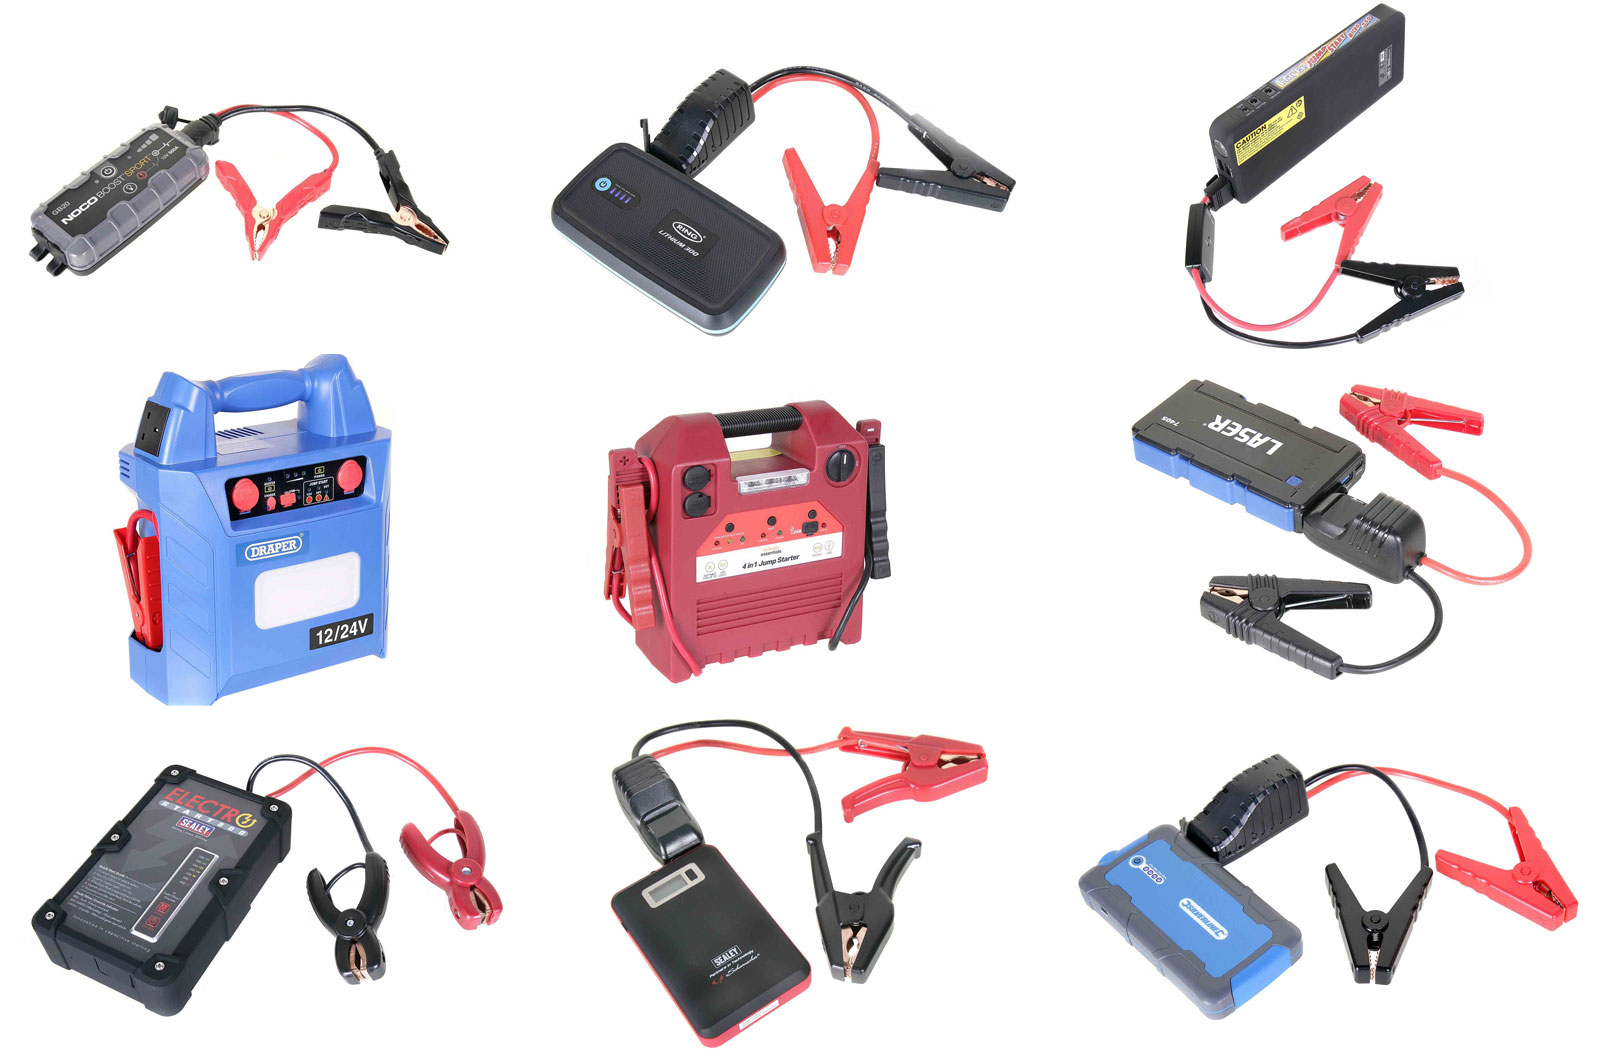 4000 Amp current Lithium-ion Battery Car Booster Starting Device 12V/24V  Portable Emergency Jump Starter - AliExpress